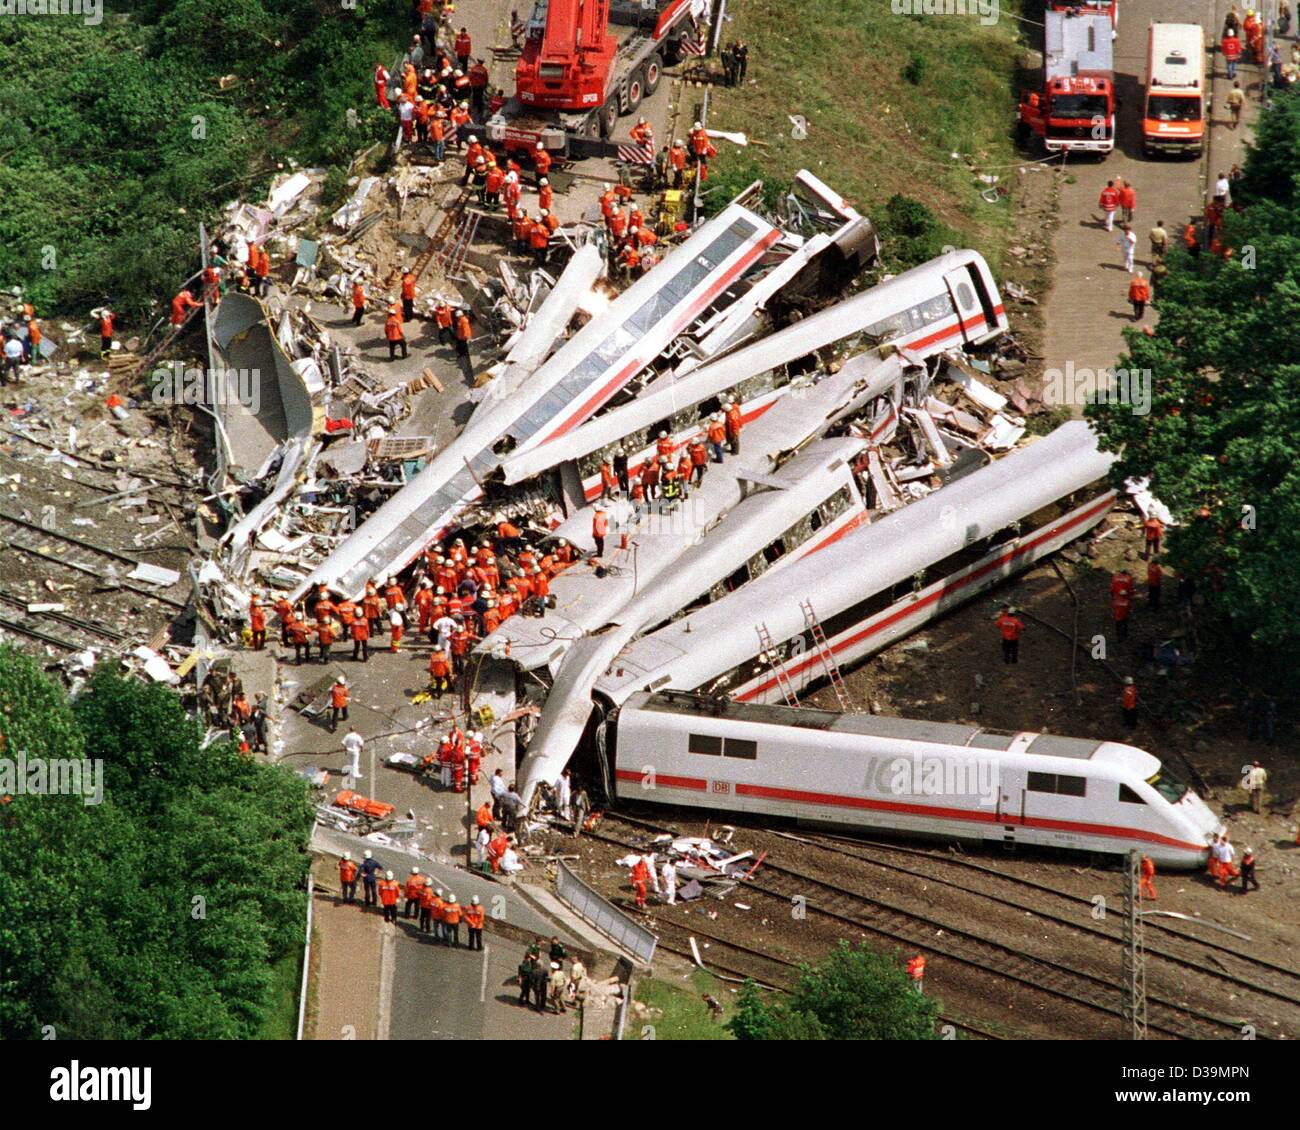 (dpa files) - Aerial view of the crash site of a German high speed train ICE in Eschede, Northern Germany, 3 June 1998. Hundreds of rescue workers are trying to give first aid to the victims. 101 people were killed in the second worst train crash in postwar Germany when the ICE passenger train crash Stock Photo